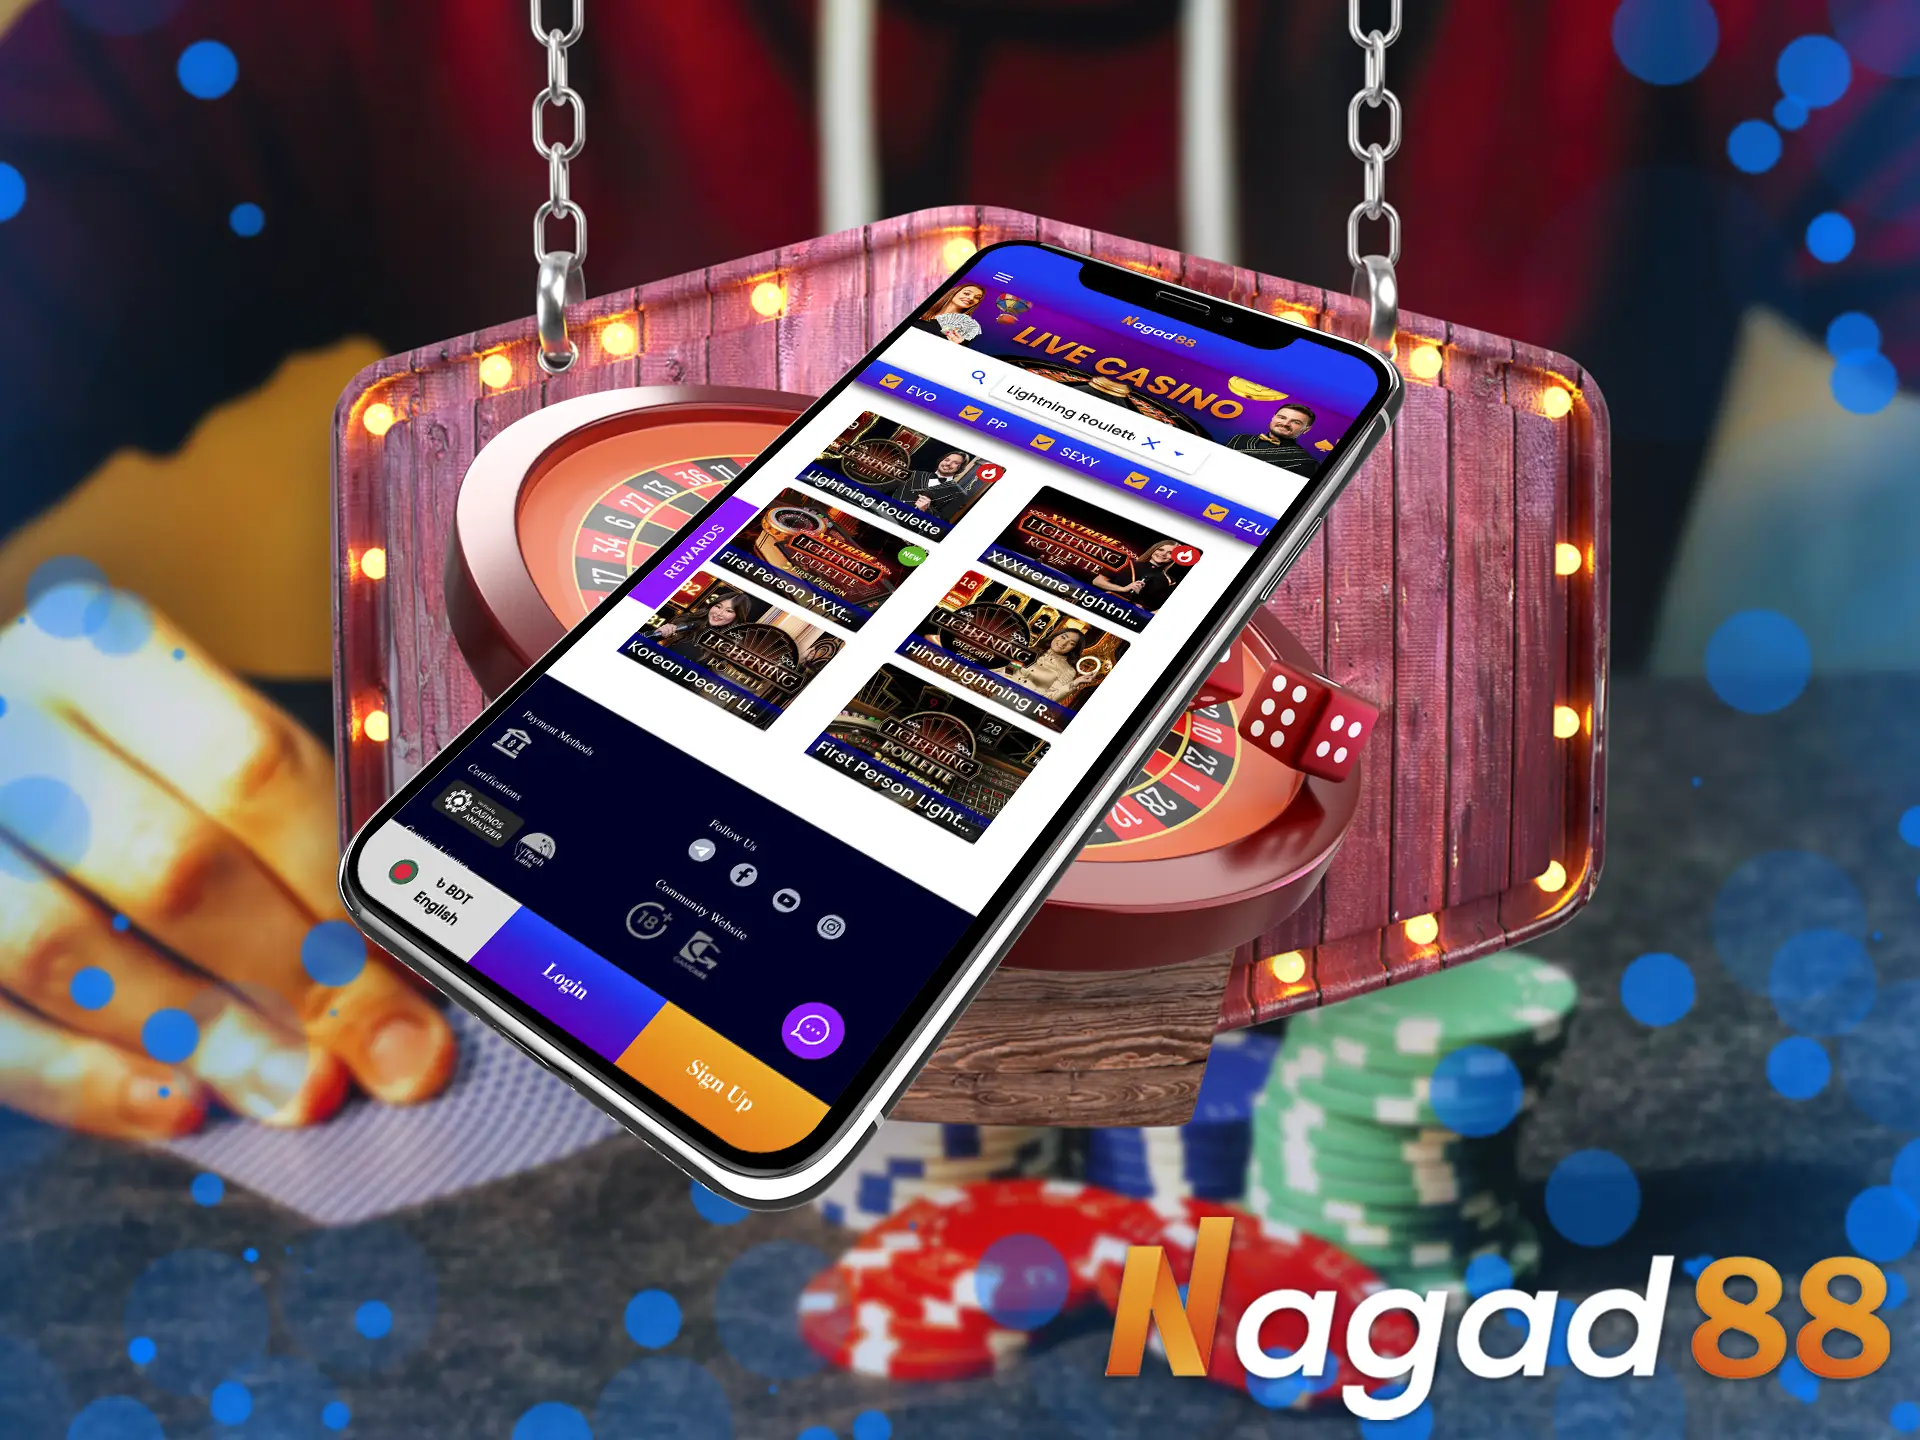 A giant jackpot awaits Nagad88 players, as well as many other interesting prizes.